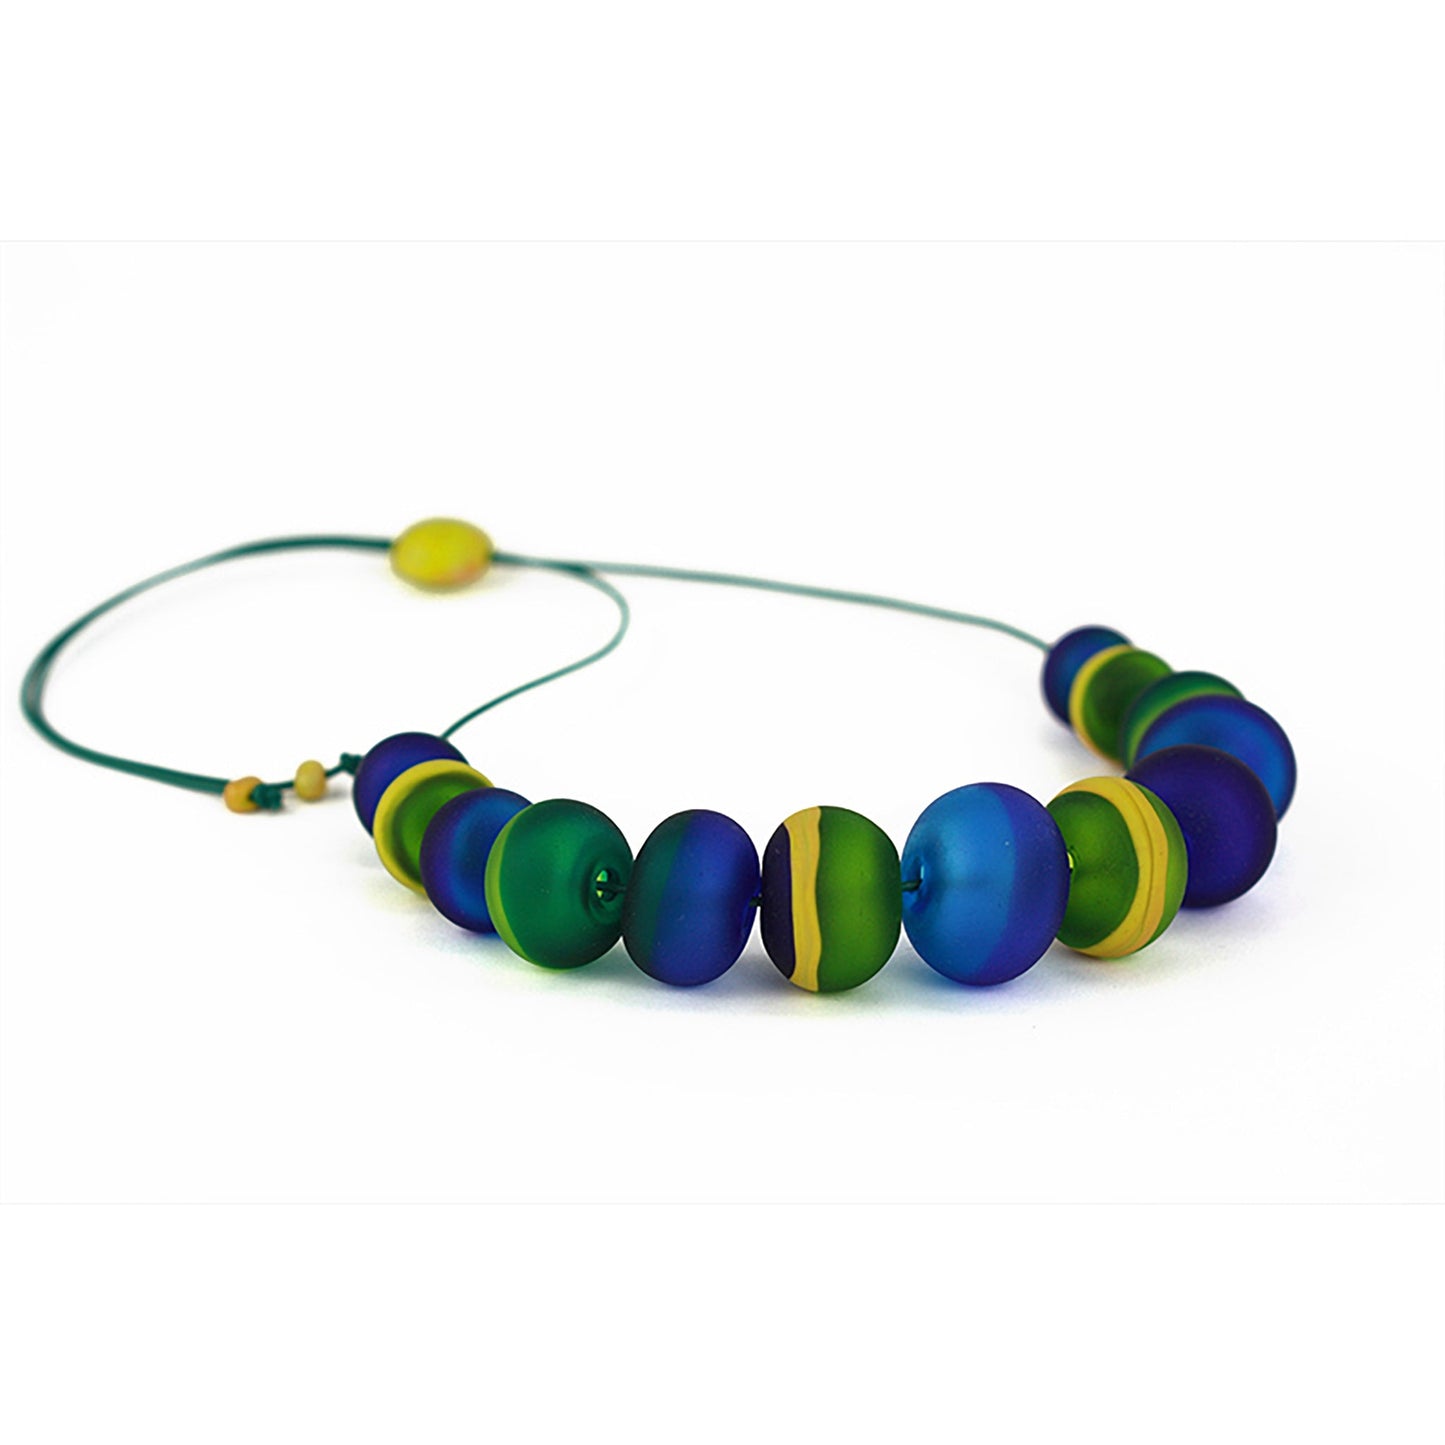 Soft stripes necklace -blue, green and ochre